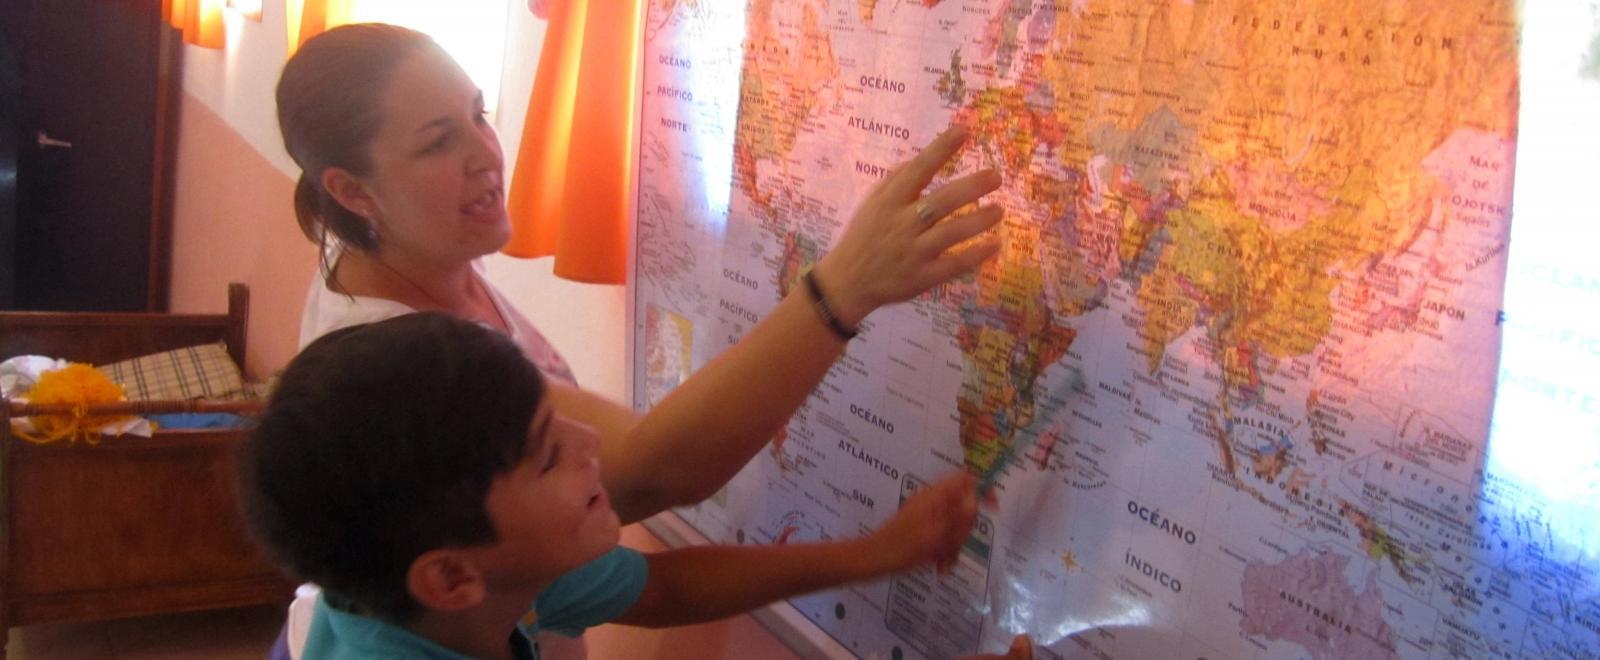 A volunteer teaches geography as part of her volunteer teaching project in Argentina.